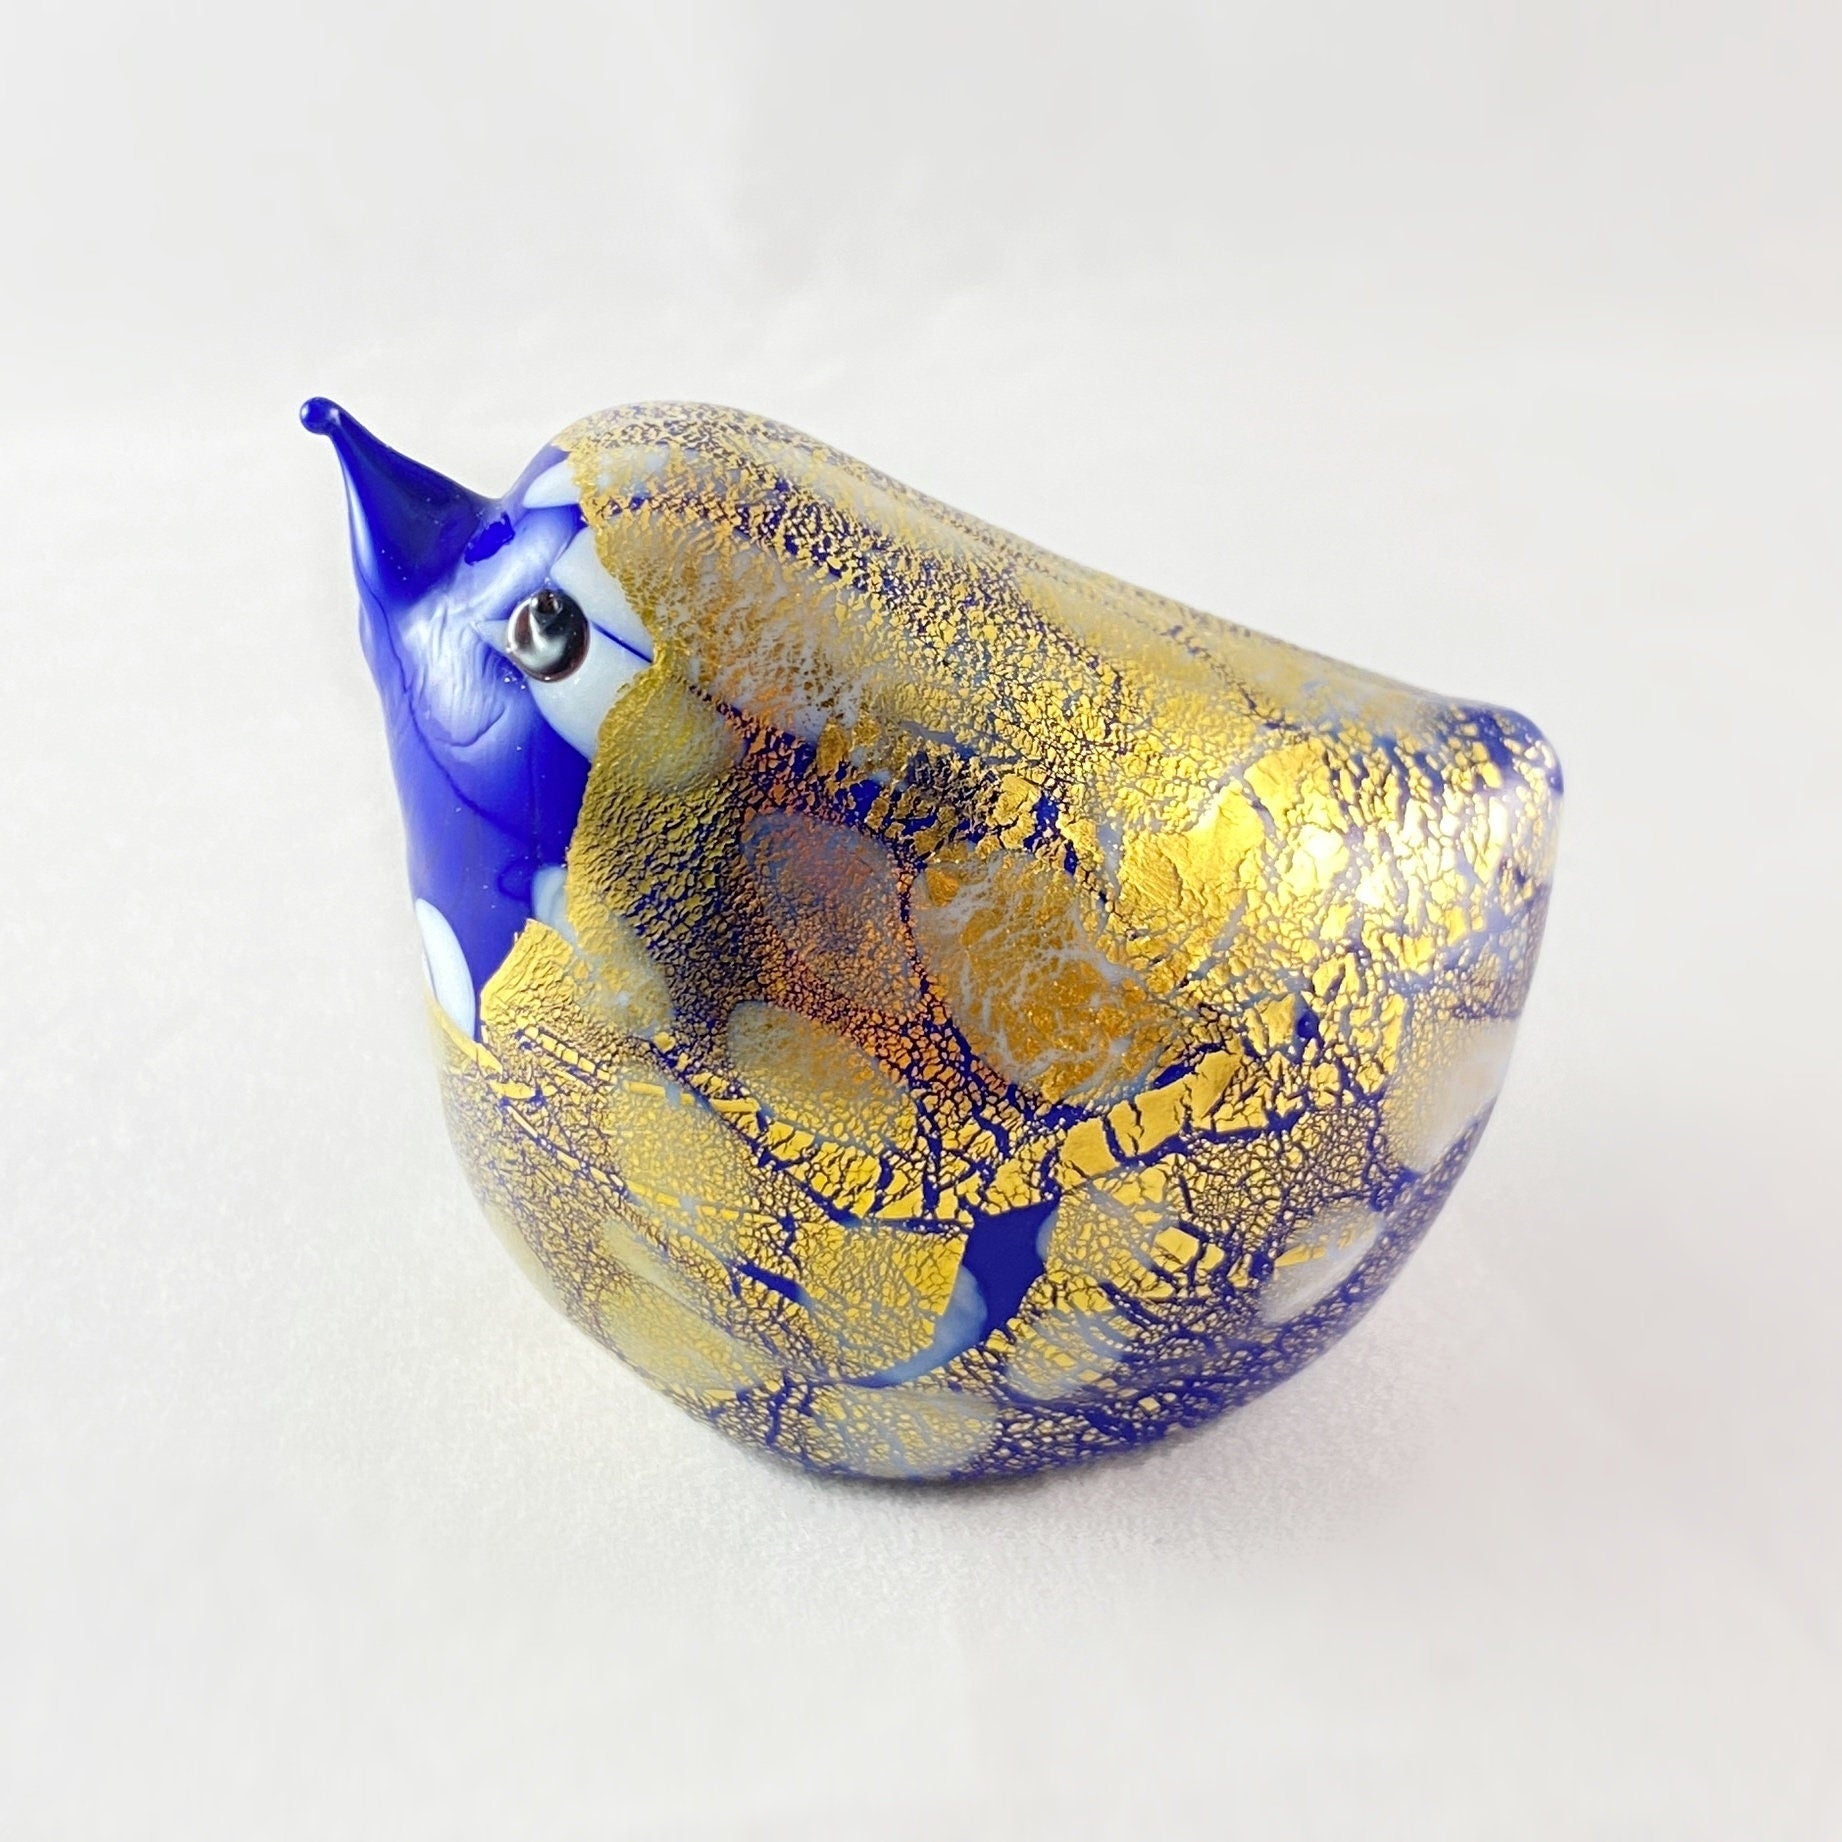 Blue and Gold Venetian Glass Chubby Bird - Handmade in Italy, Colorful Murano Glass